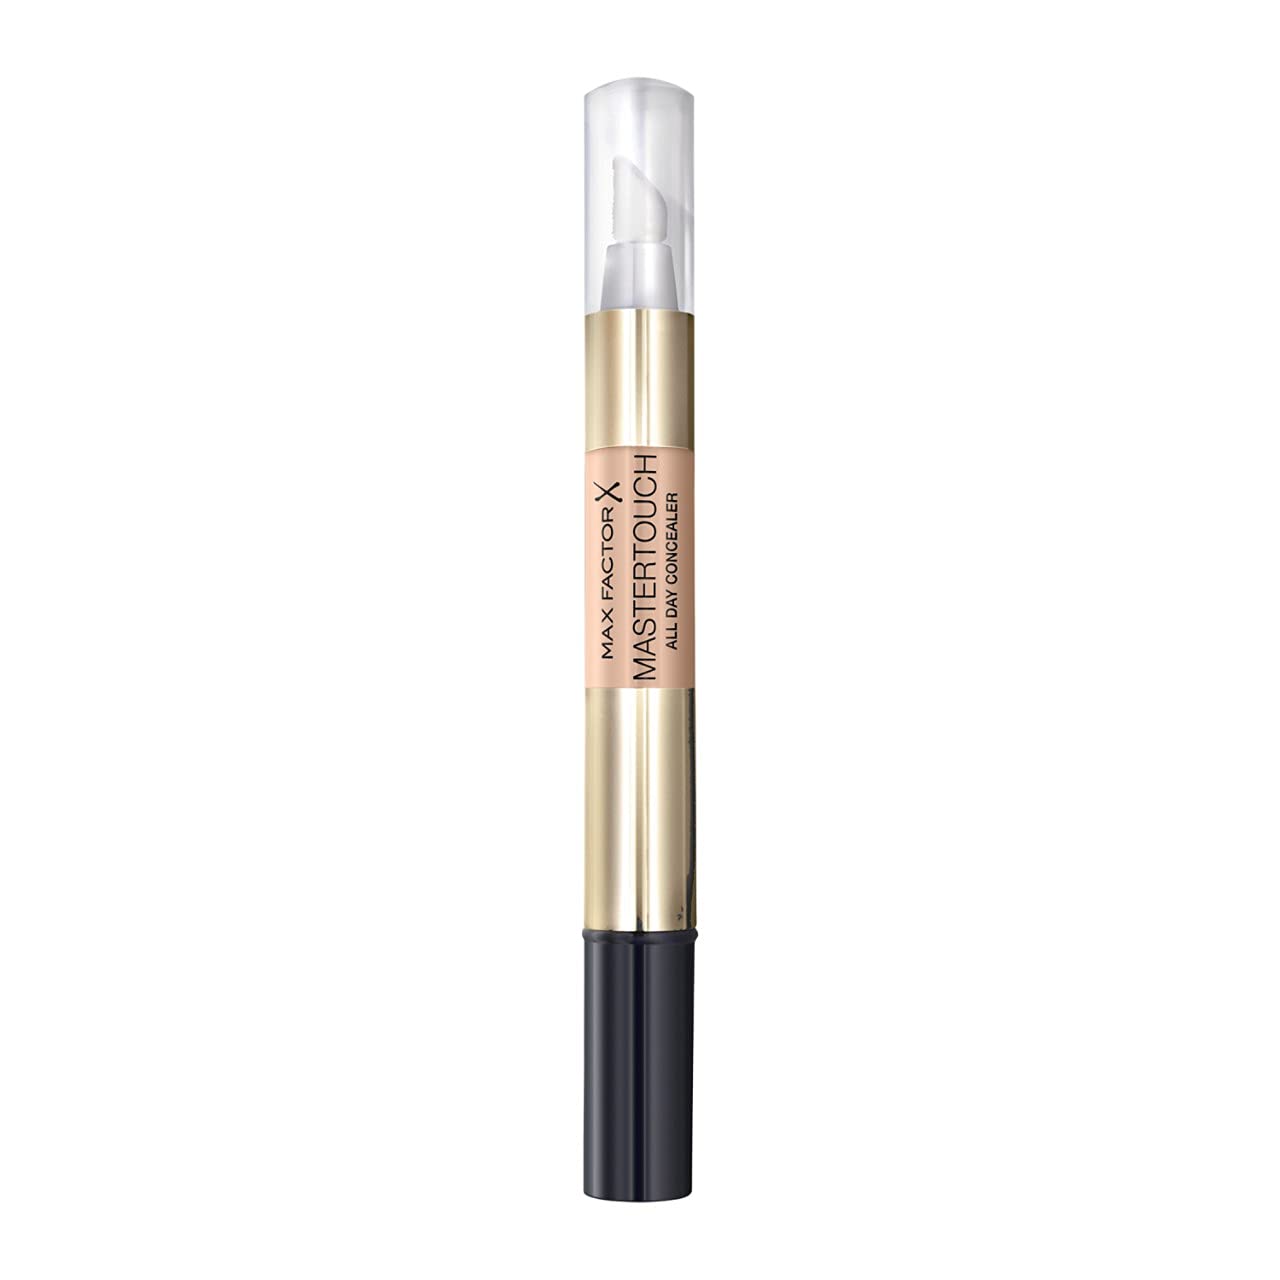 Max Factor Mastertouch All Day Concealer Pen, SPF 10, 303 Ivory